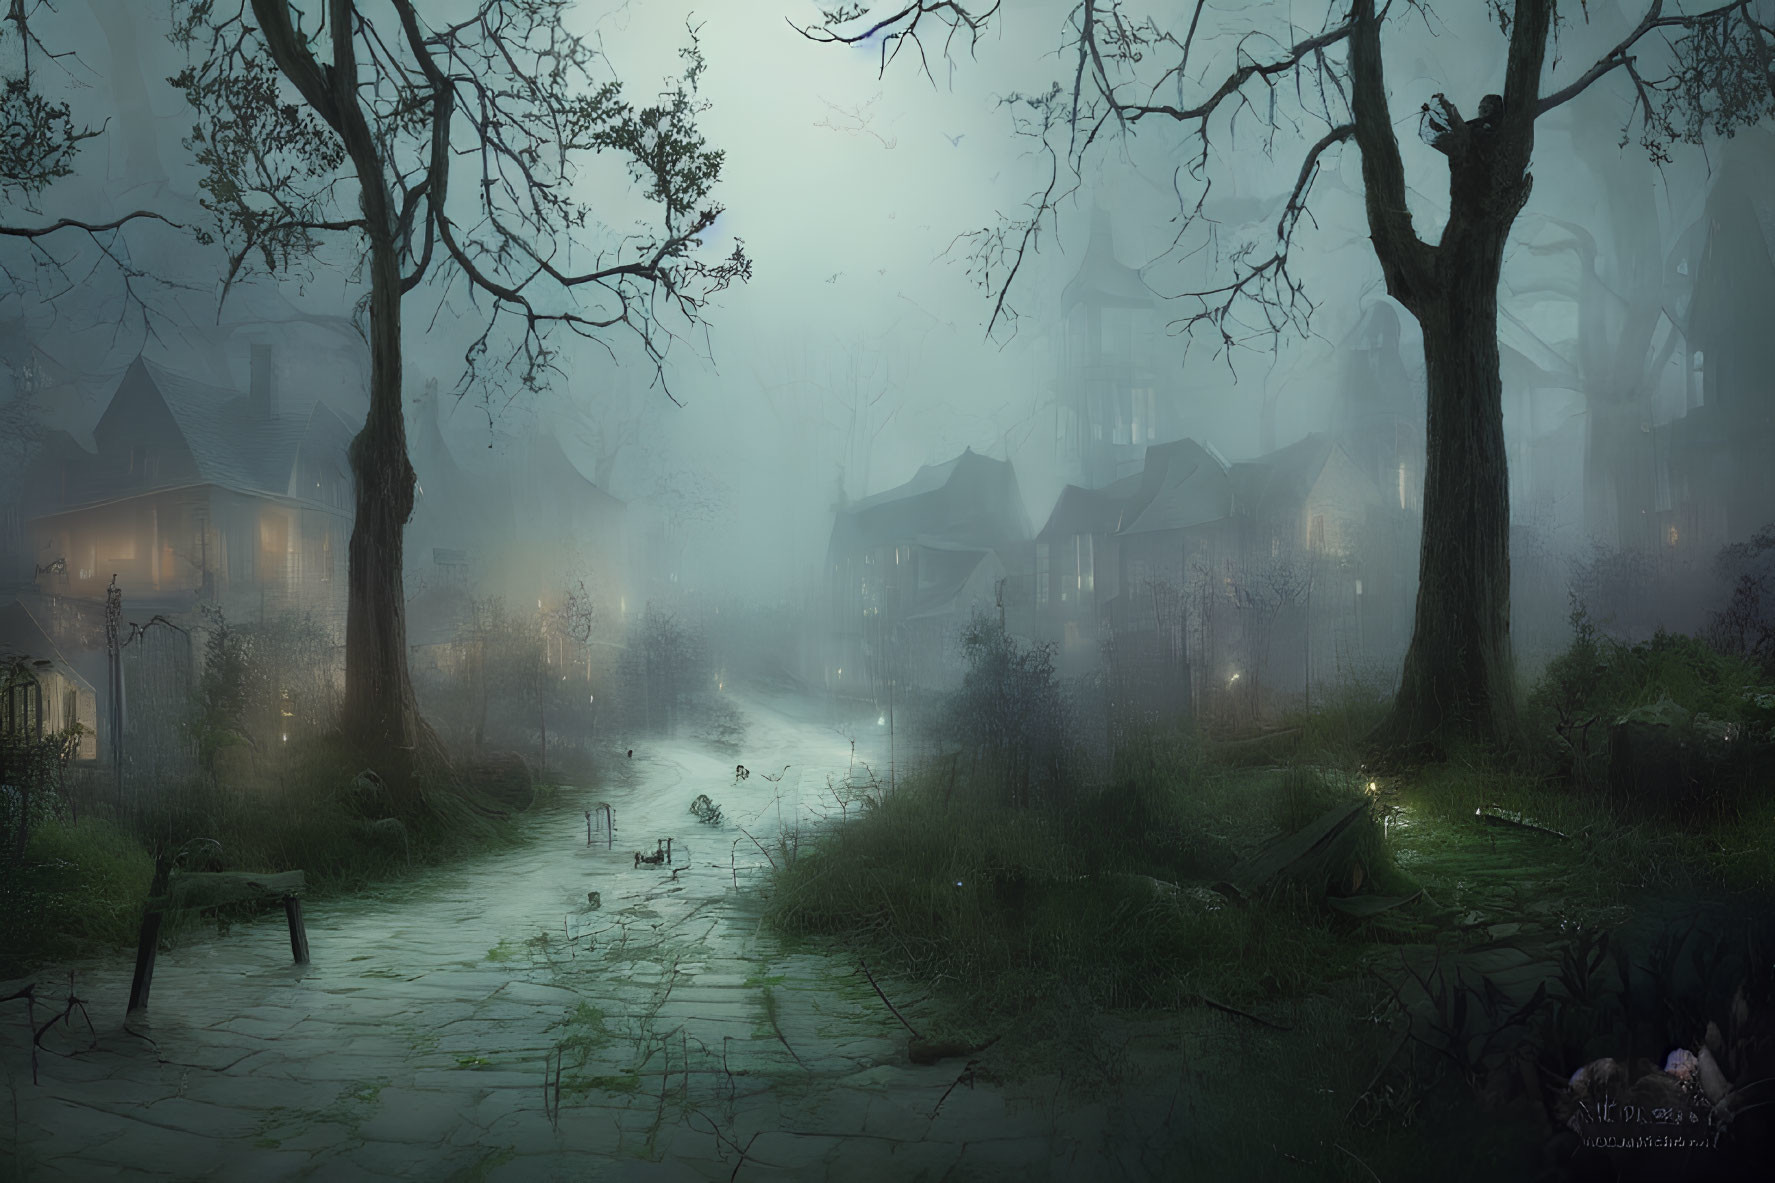 Moonlit misty old village with cobblestone paths, overgrown greenery, dilapidated